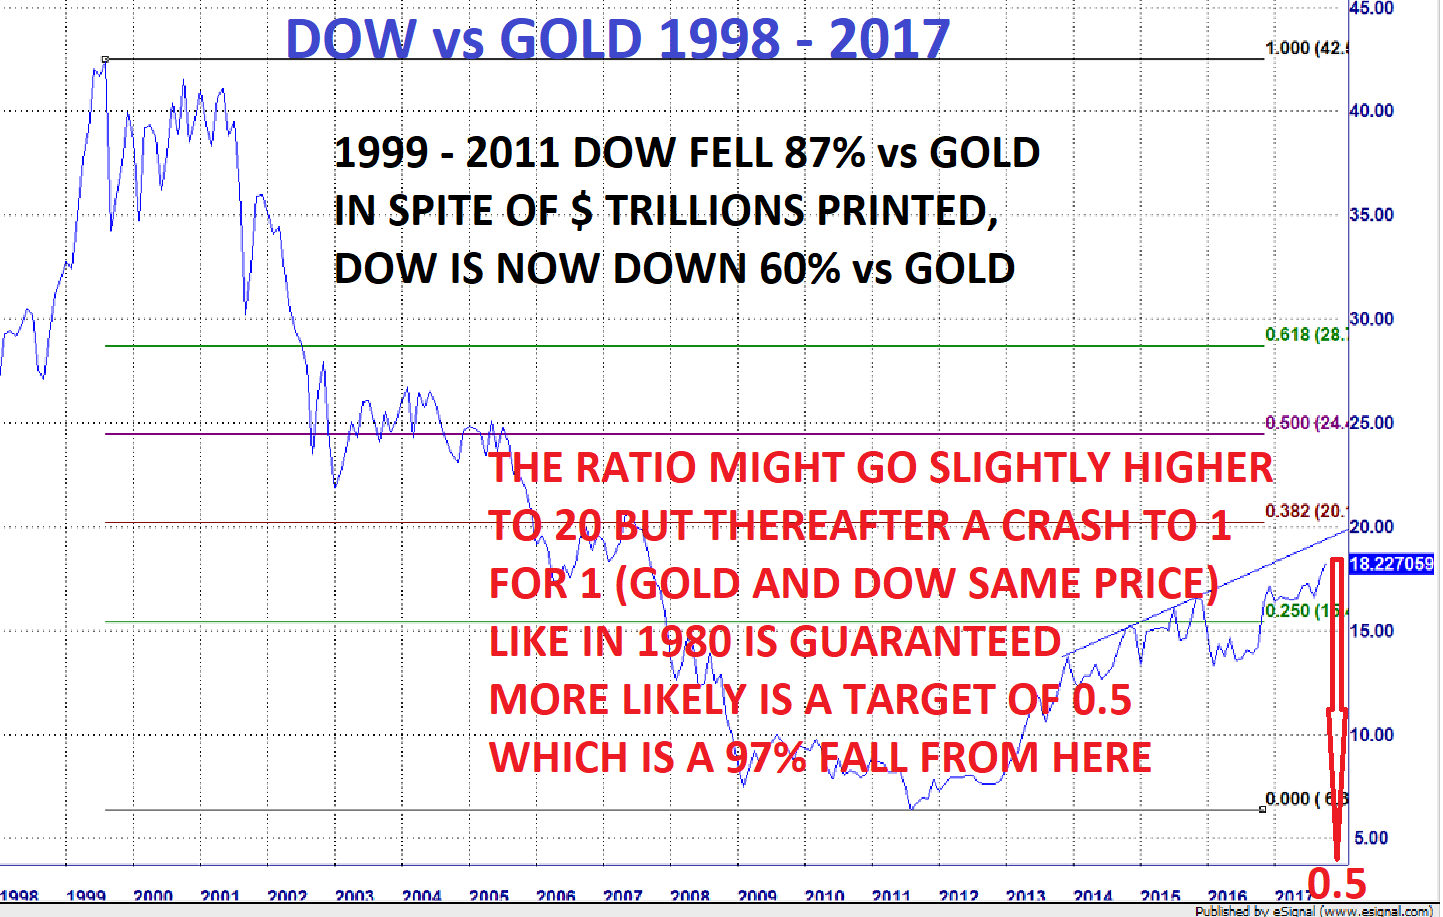 Dow vs Gold 1998 - 2017